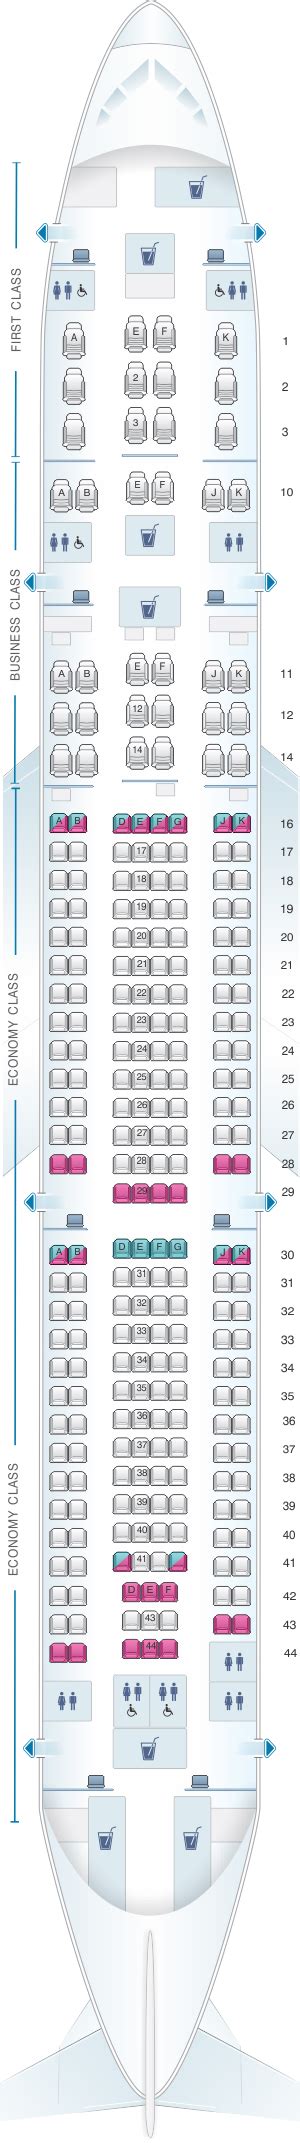 Qatar Airbus A350 900 Business Cl Seat Map Tutorial Pics